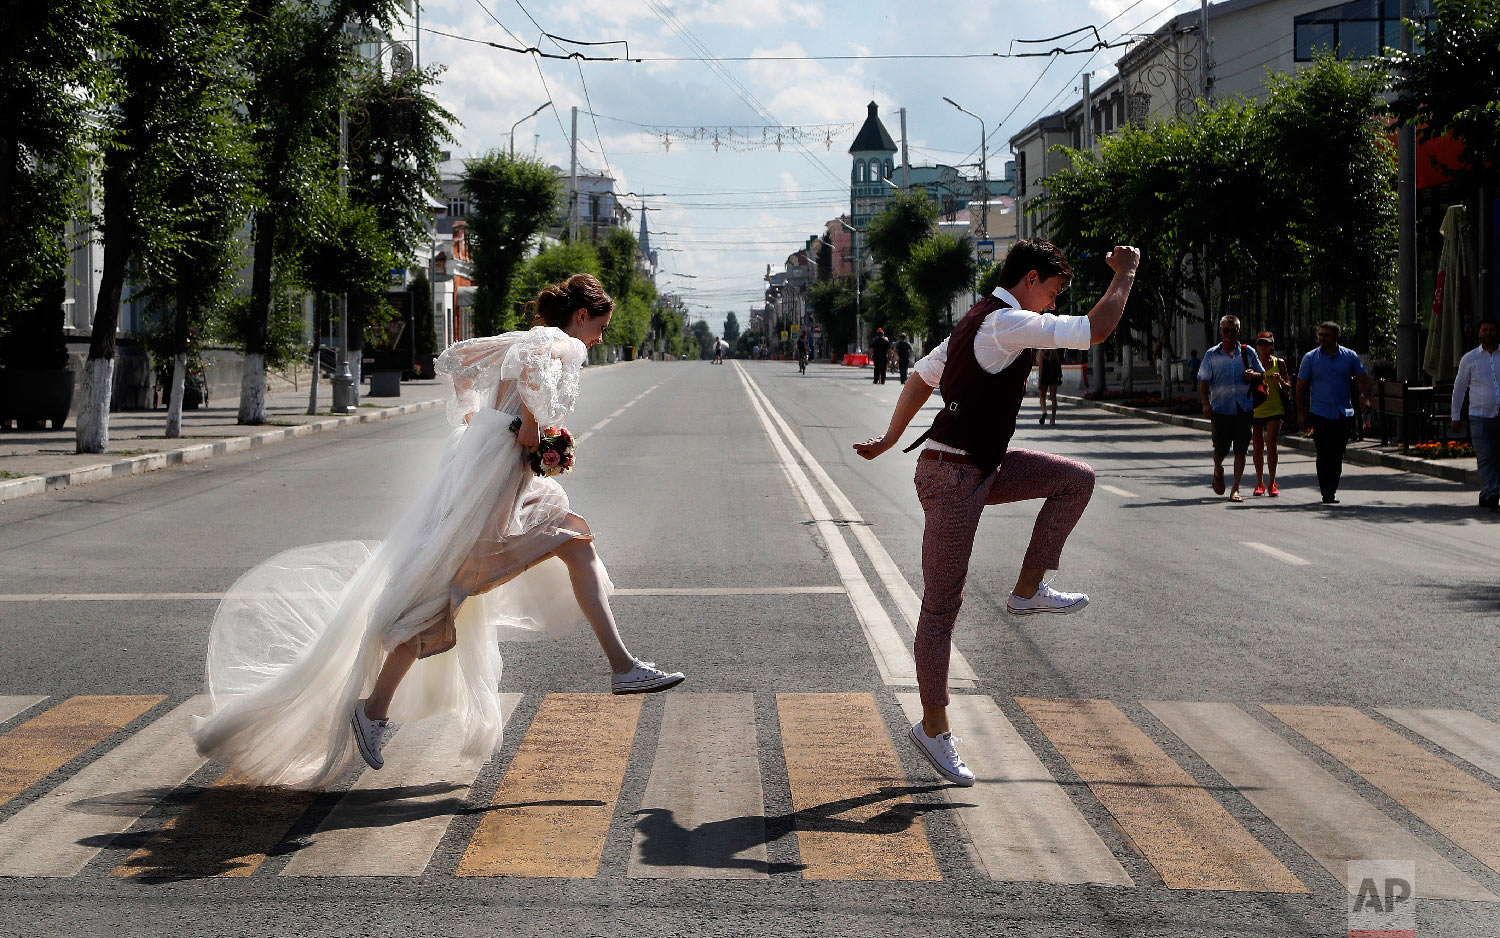  Newlyweds pose on a zebra crossing for wedding photographers during the 2018 soccer World Cup in Samara, Russia on July 8, 2018. (AP Photo/Frank Augstein) 